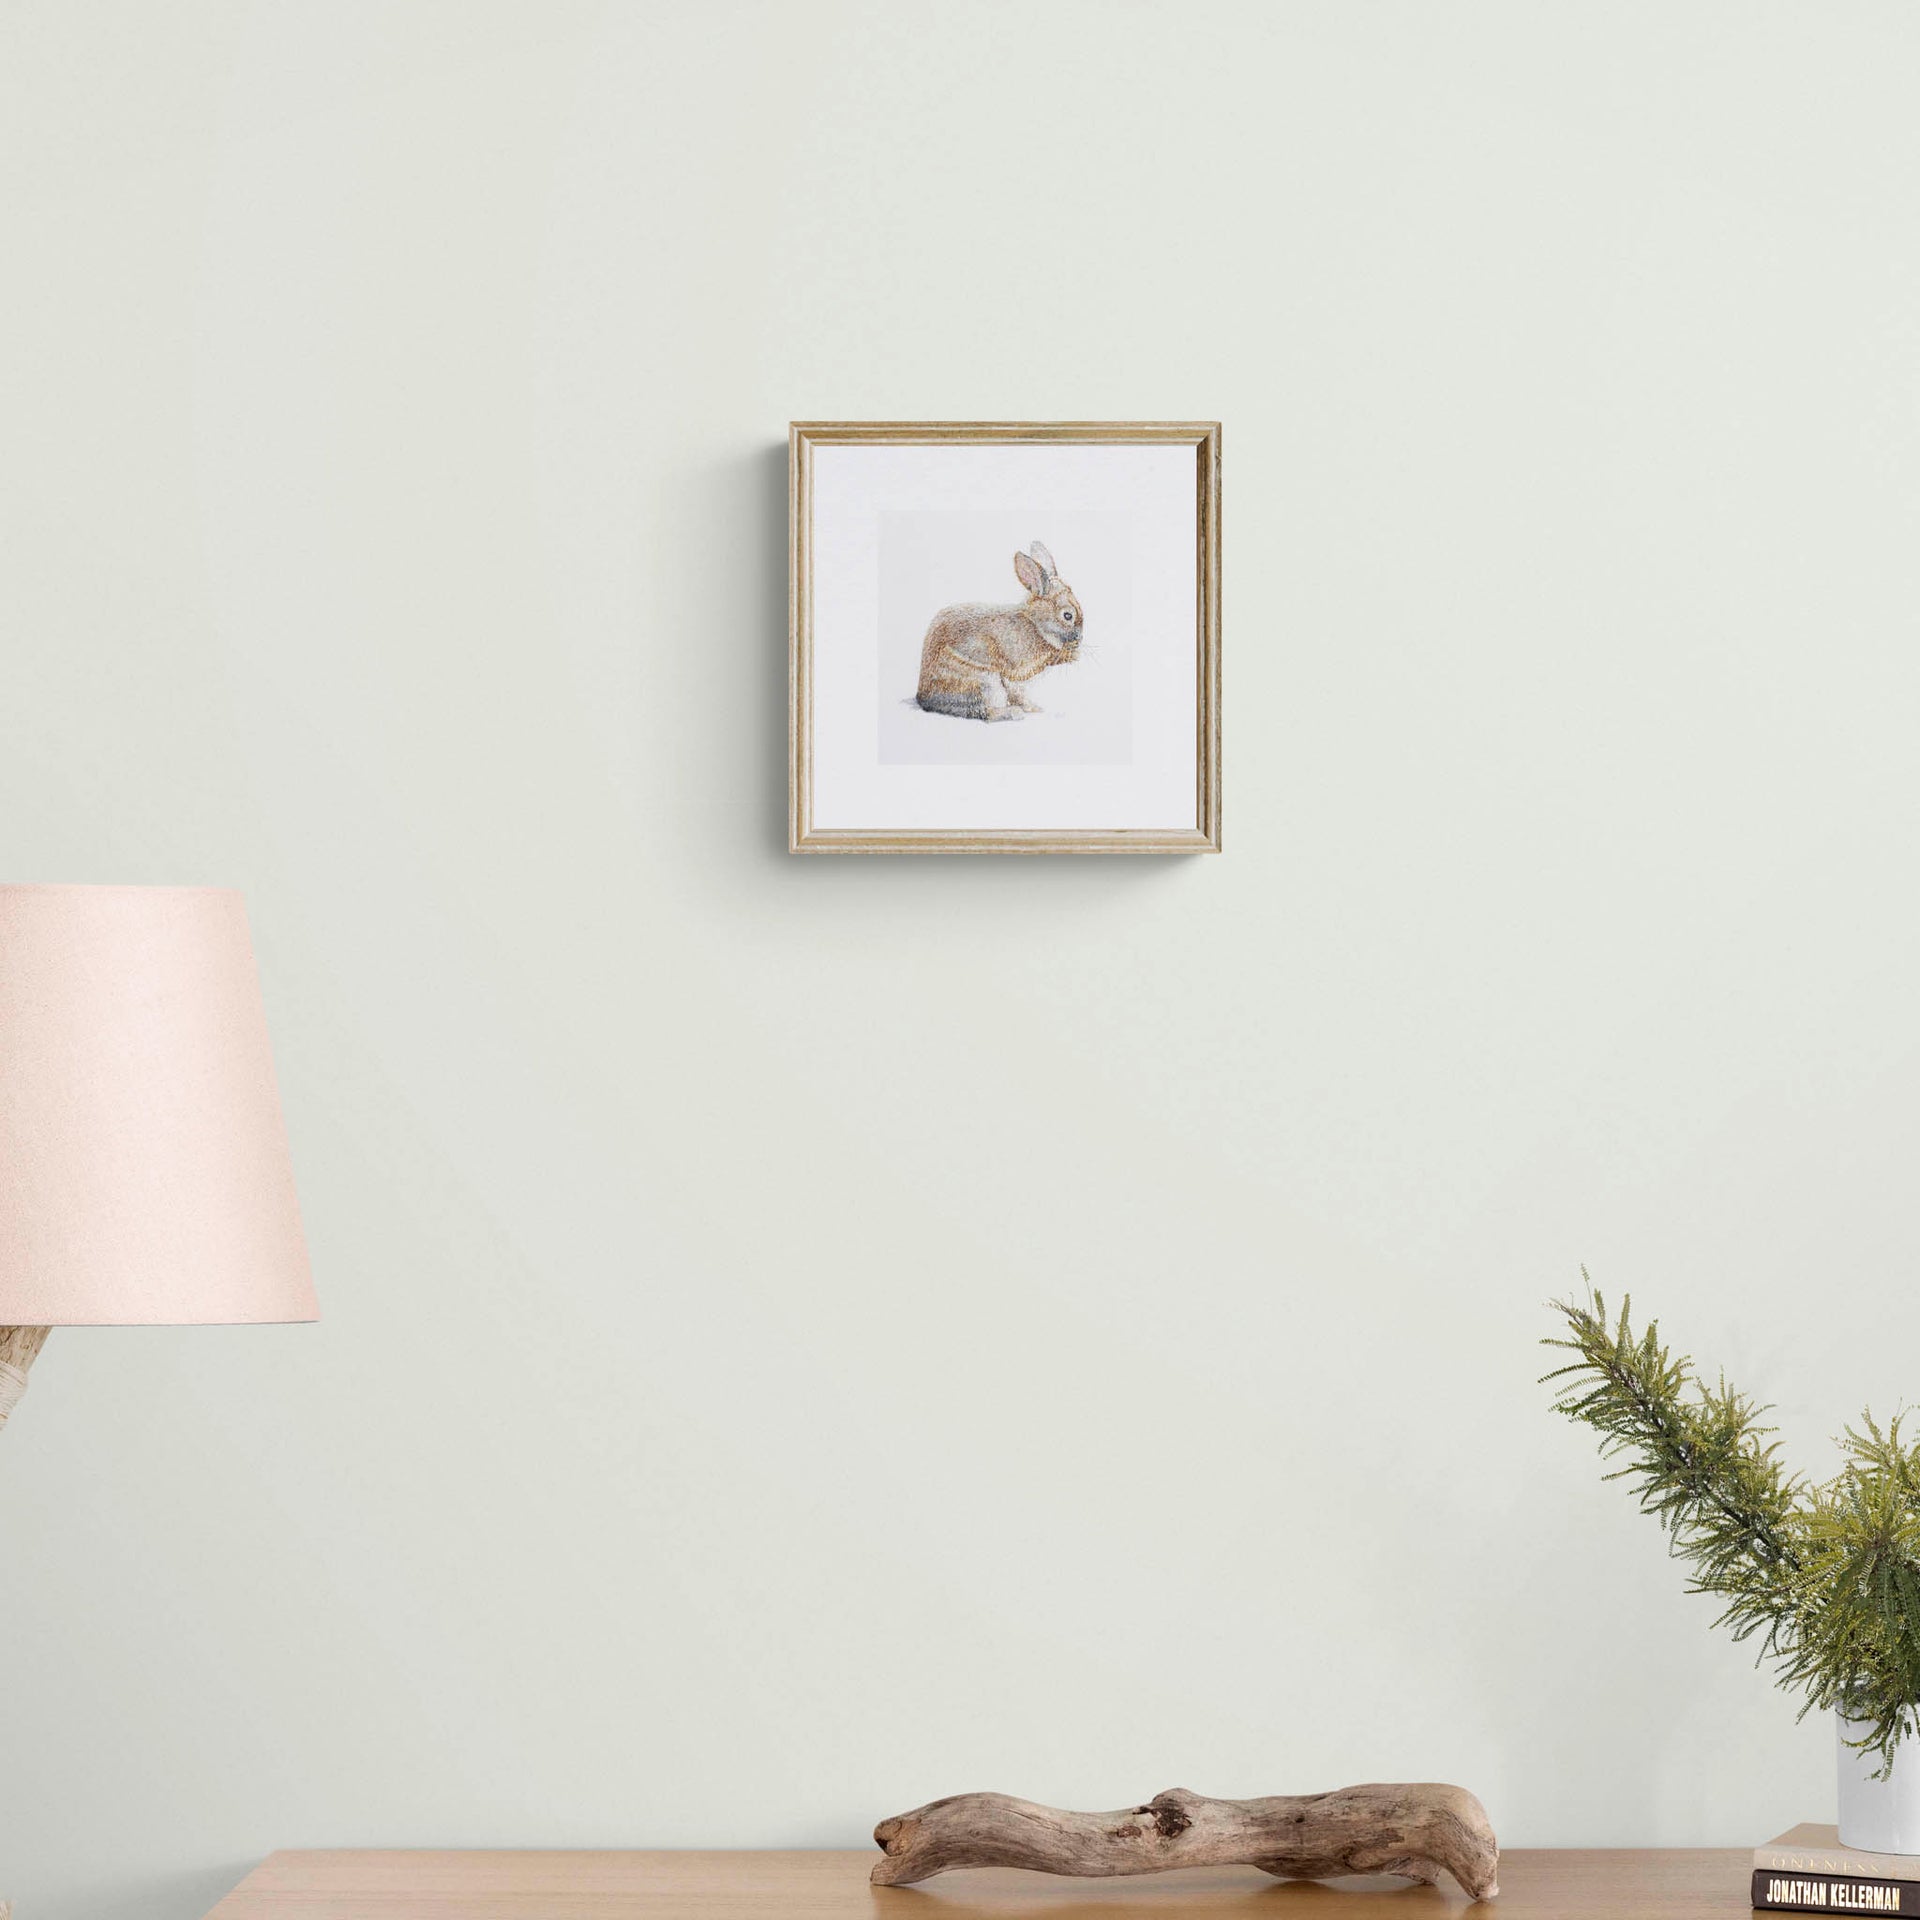 Hand embroidered bunny limited edition print in frame on the wall